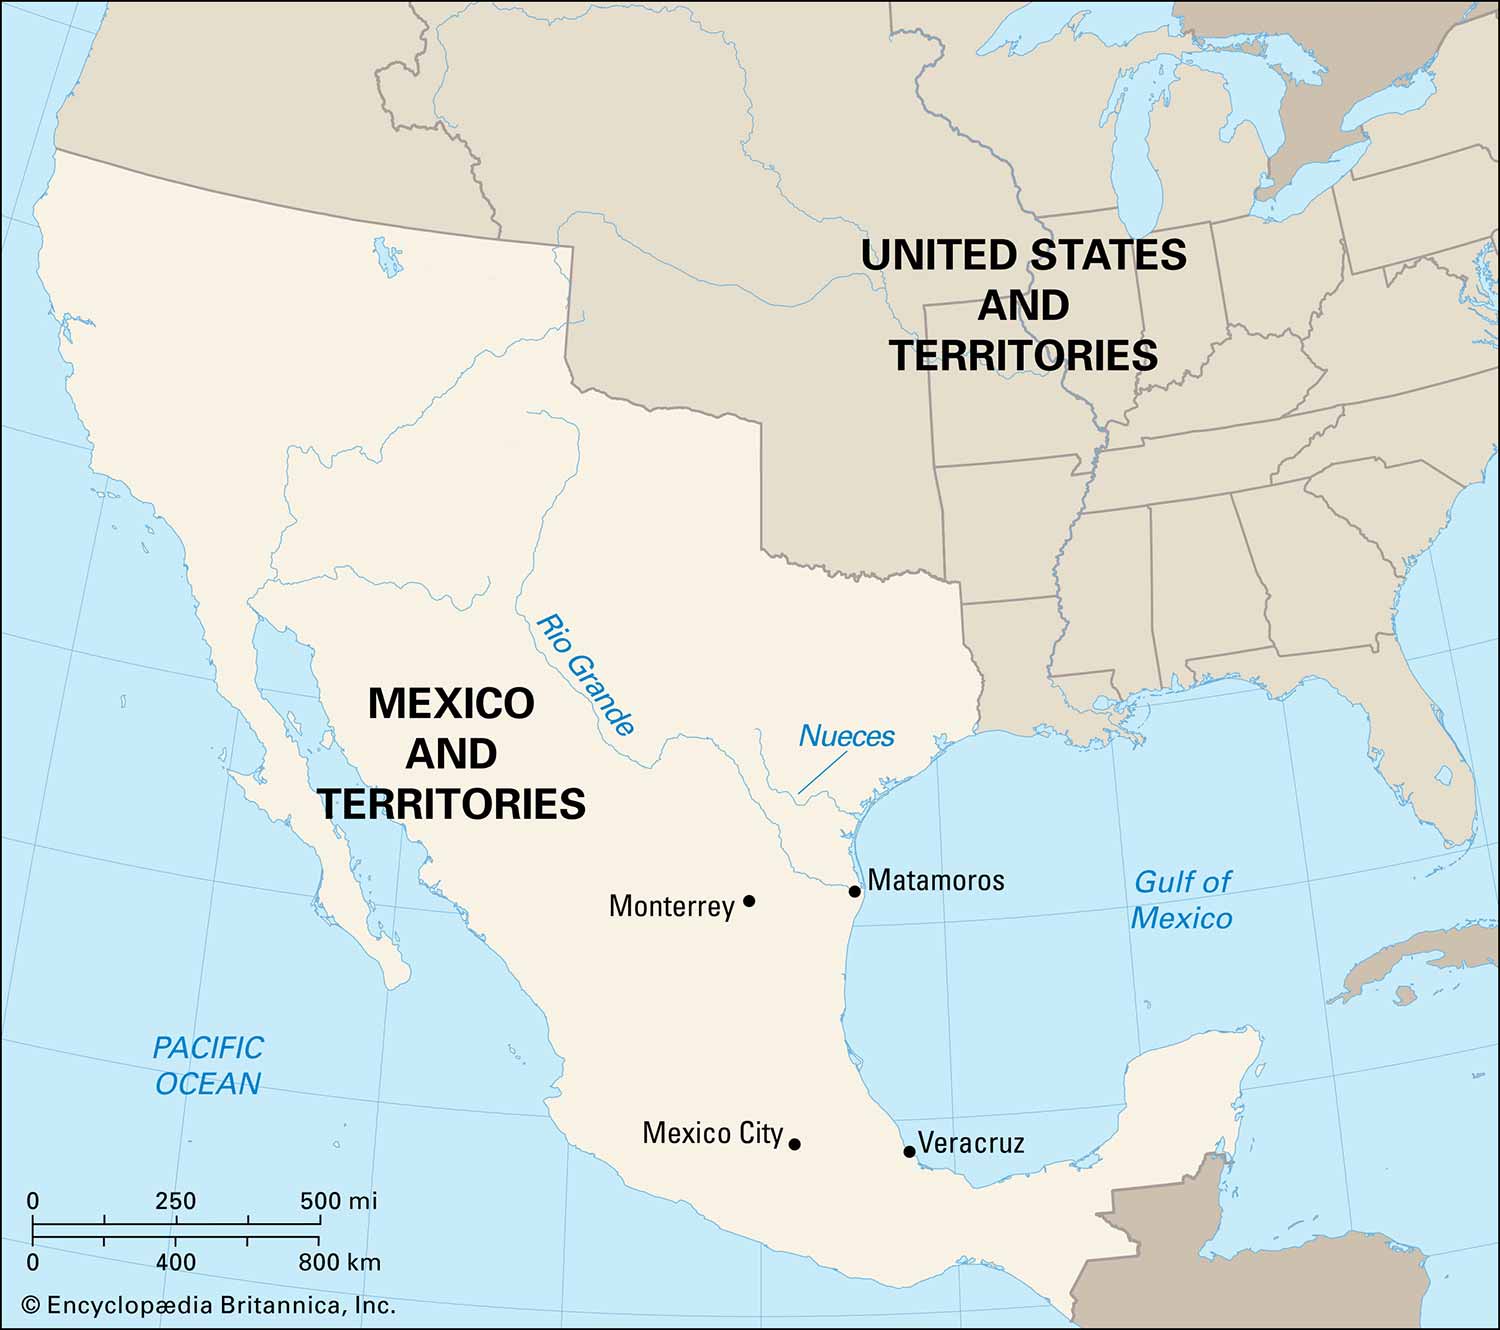 A map labeled Mexico and its territories and the United States and its territories and showing the historical borders